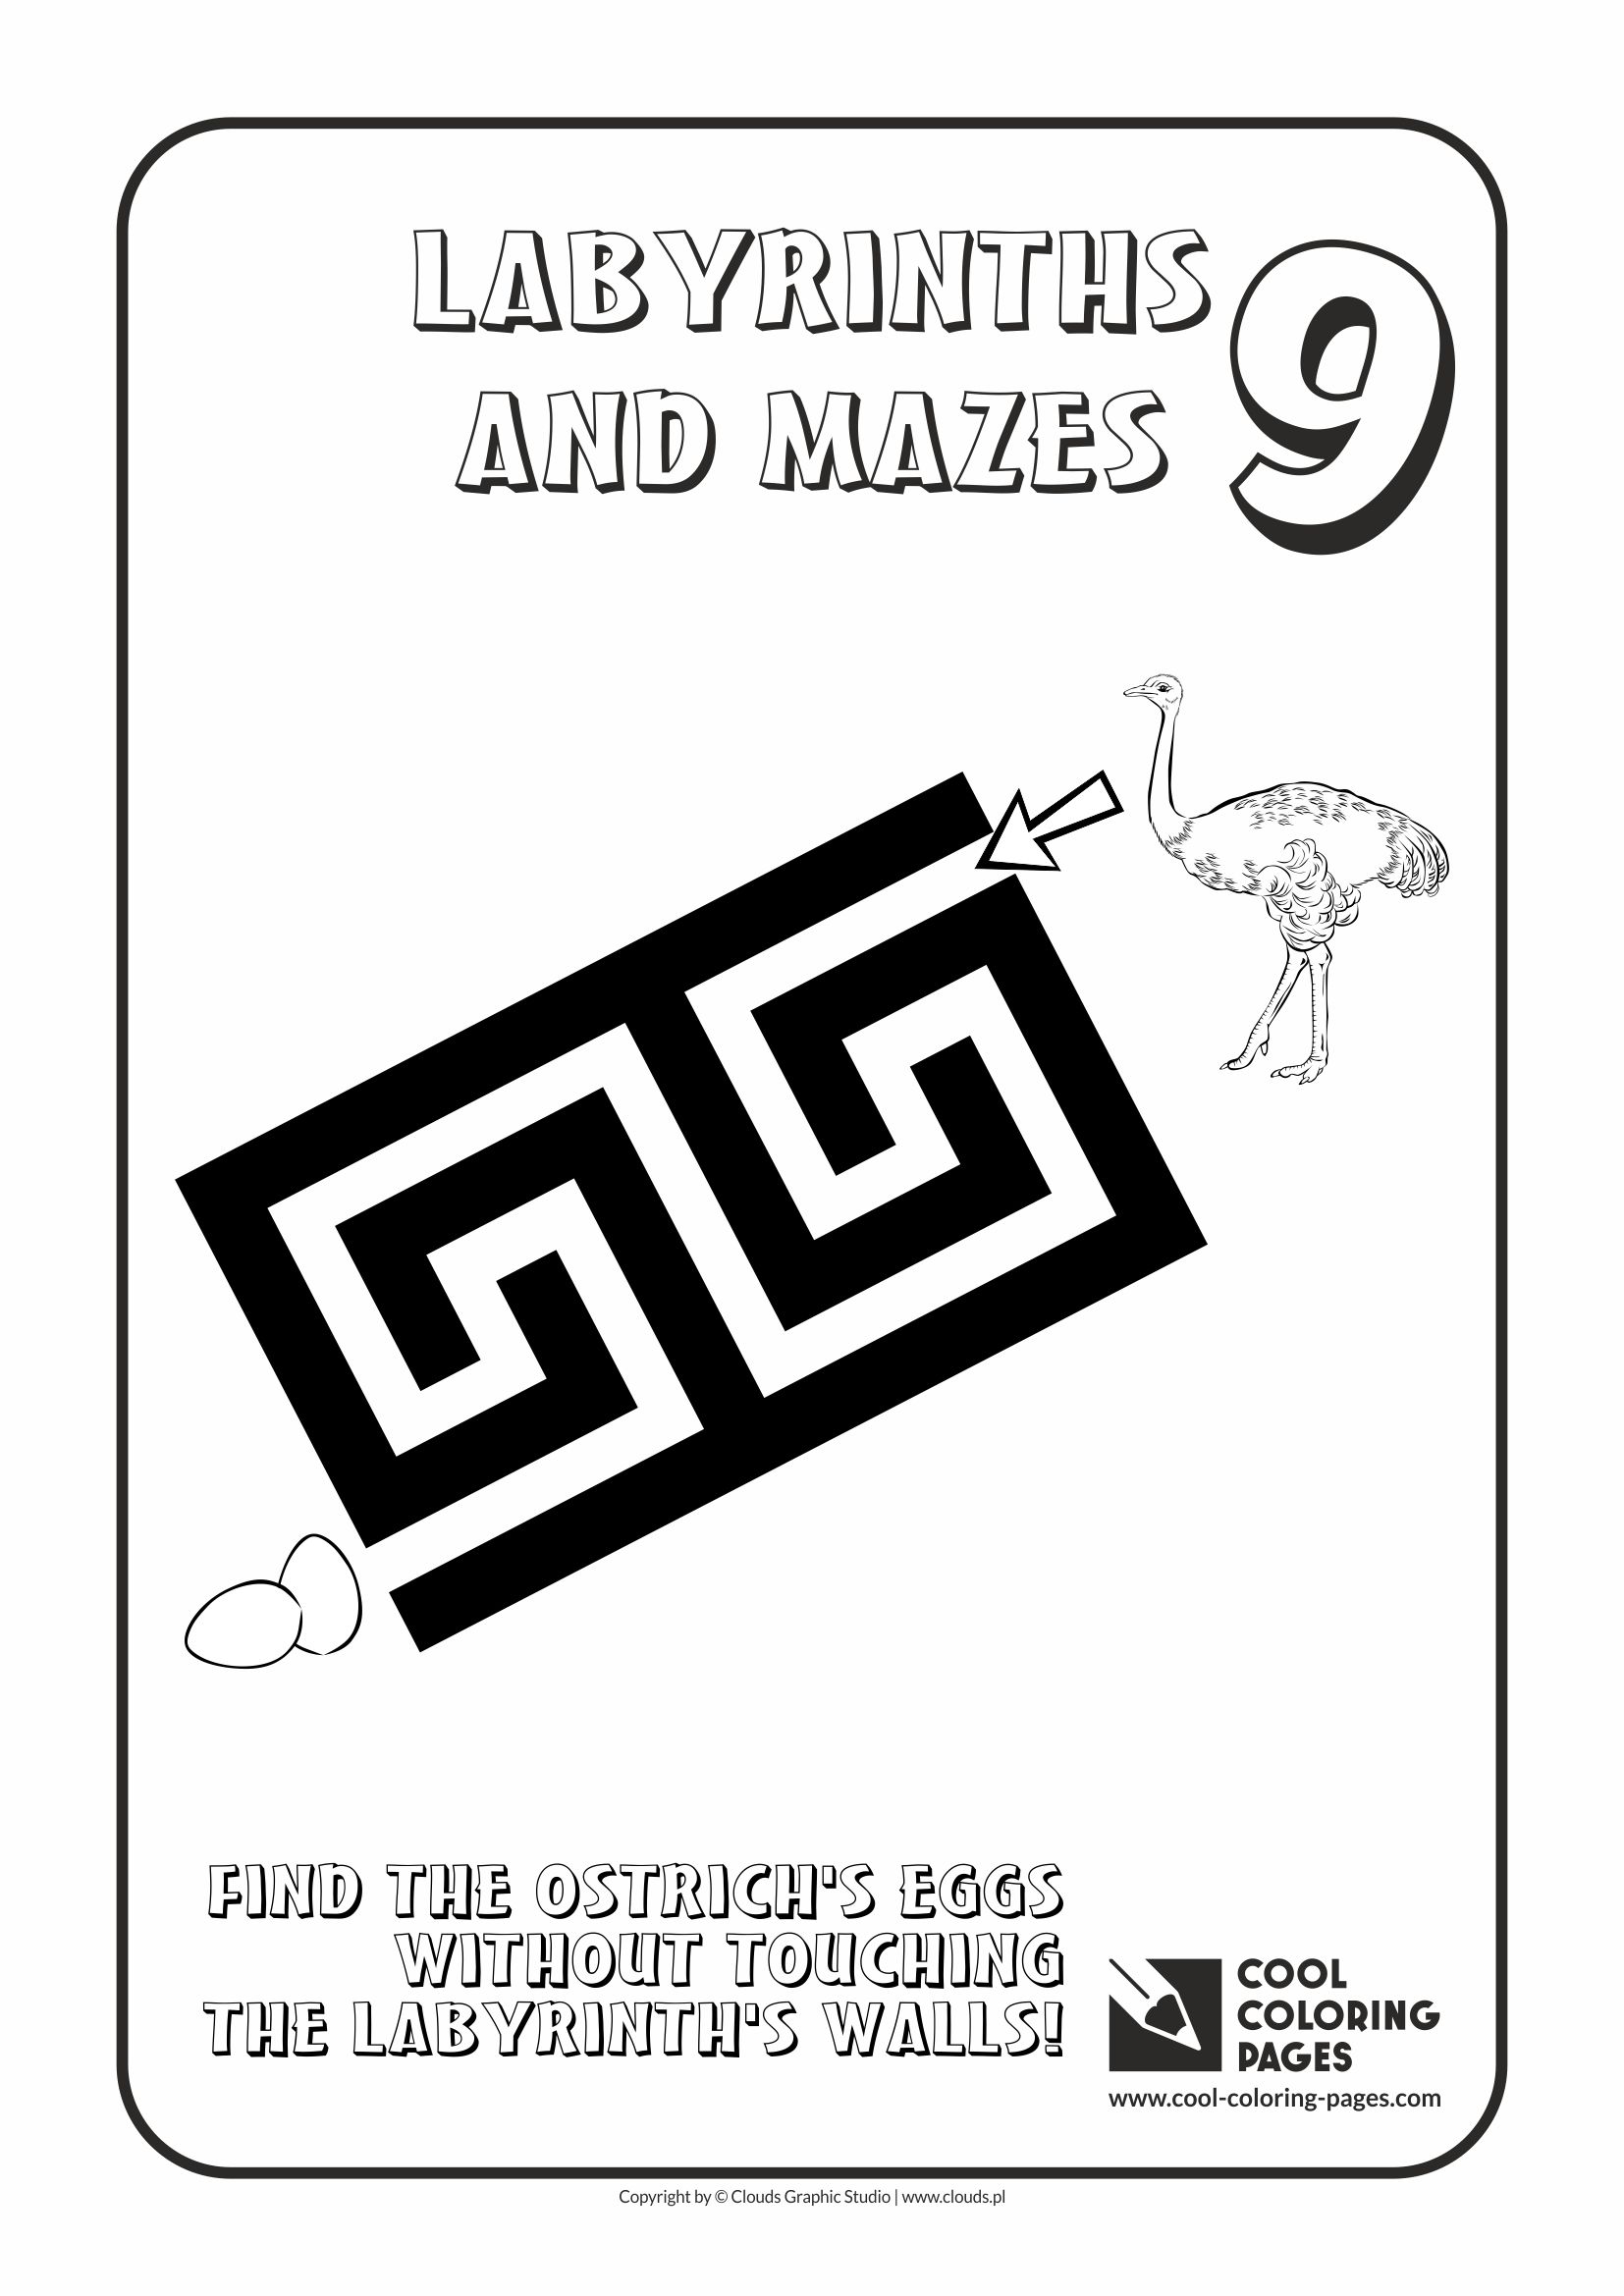 Cool Coloring Pages - Labyrinths and mazes / Maze no 9